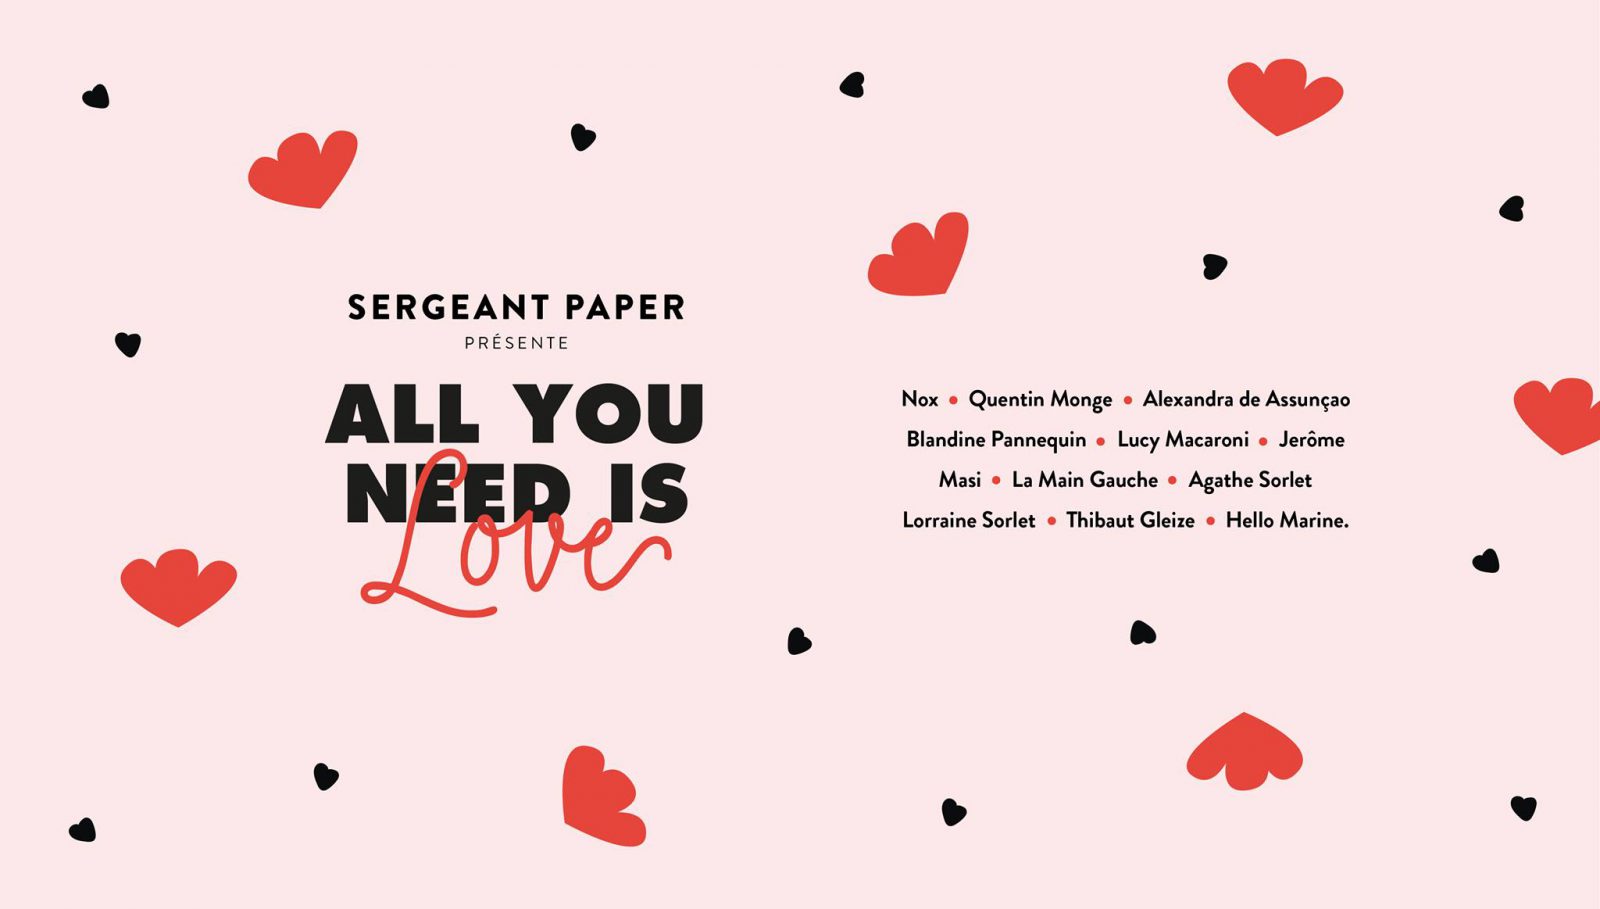 [Exposition] All You Need Is Love @Sergeant Paper